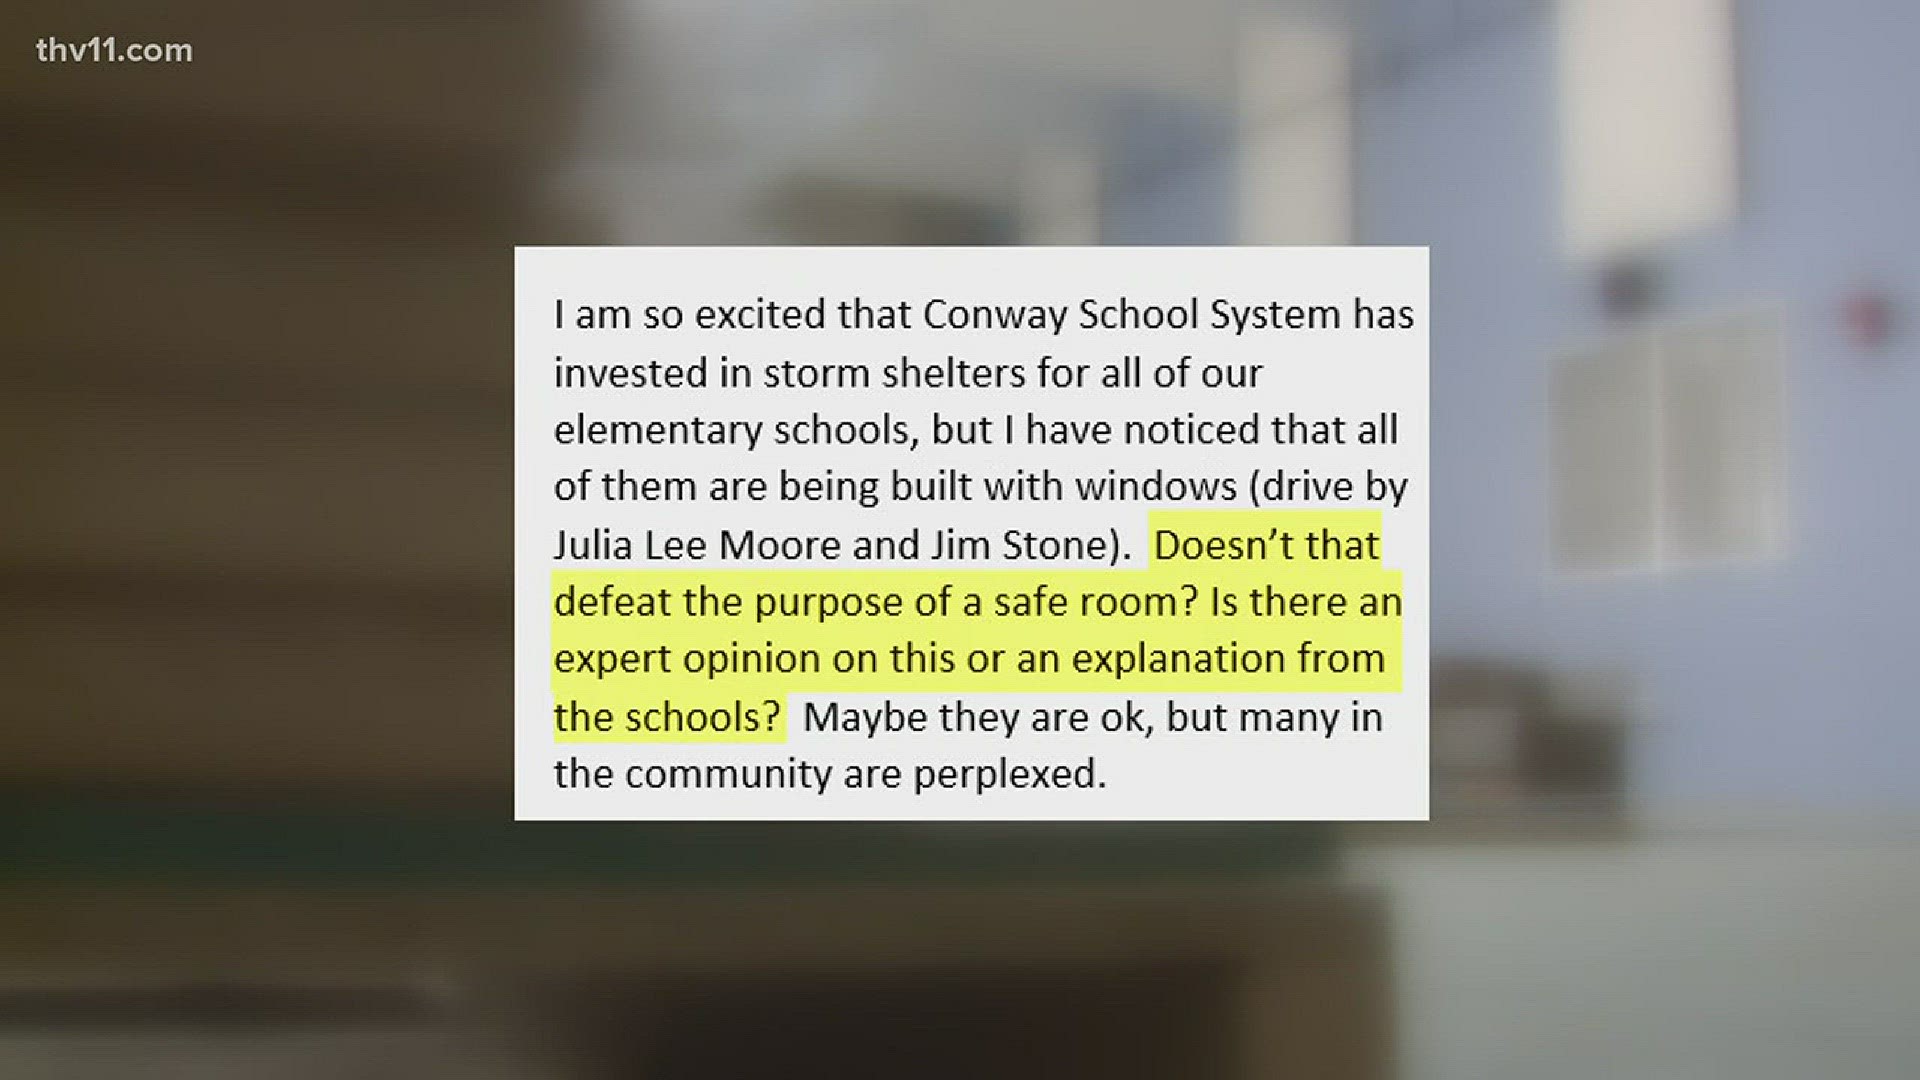 Many are asking why there are windows in a safe room designed to protect schoolchildren from tornadoes,